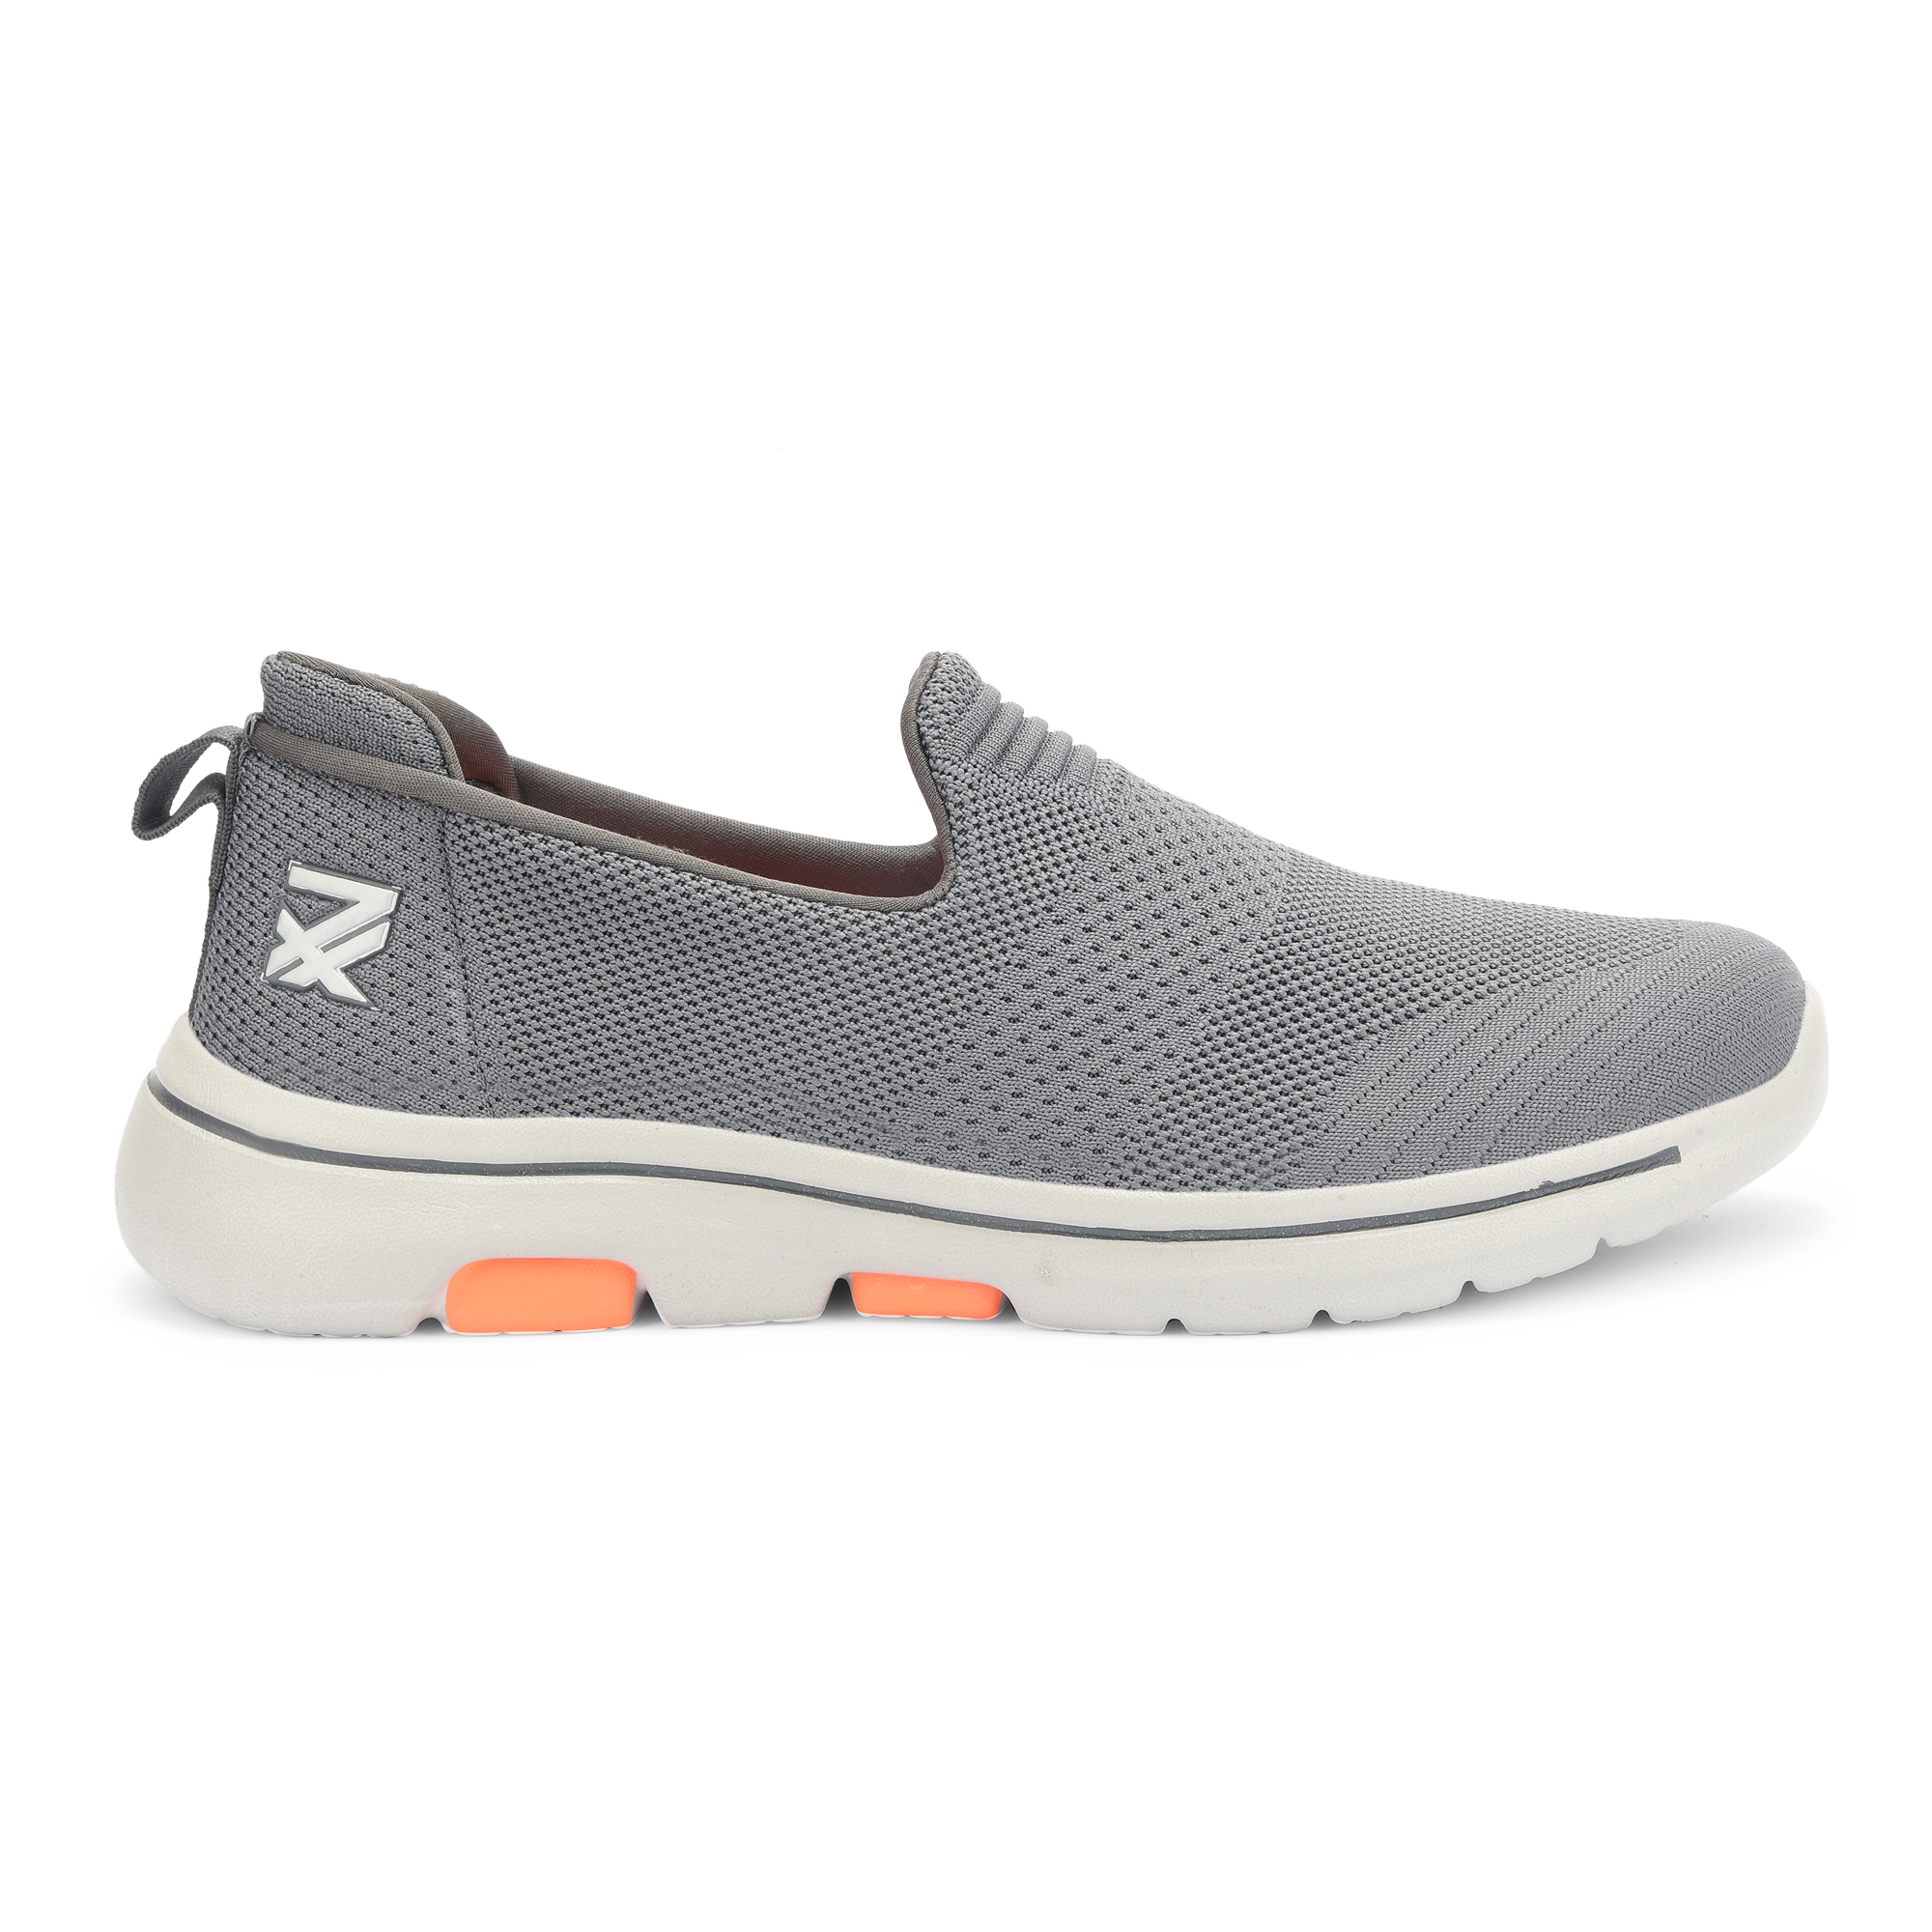 LEAP7X by Liberty RW-08 Grey Sports Shoes for Men